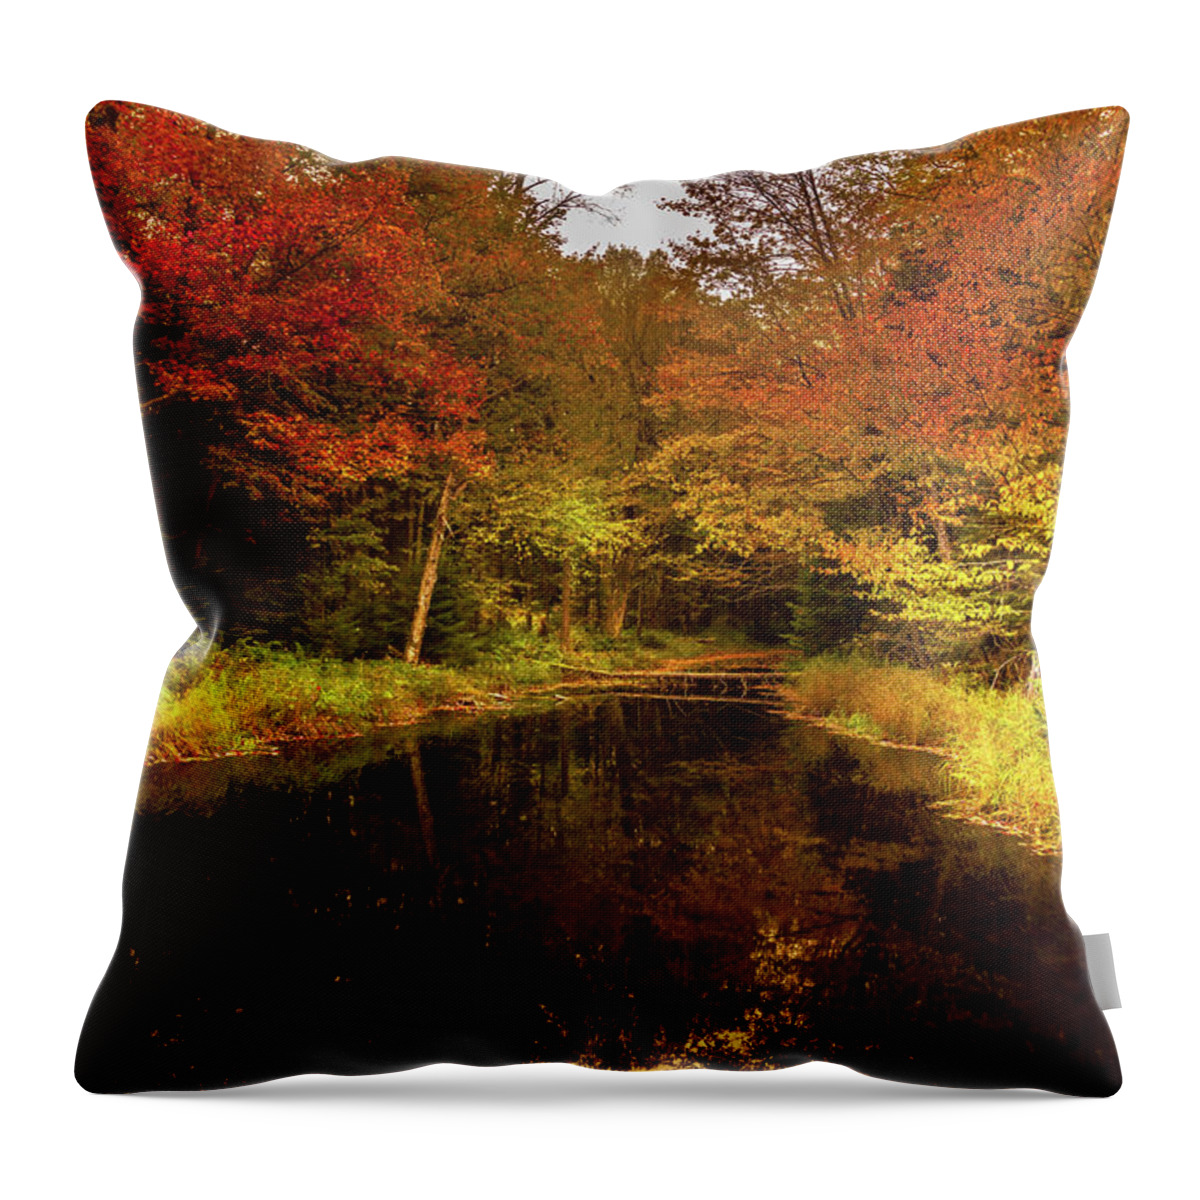 Autumn Stream Throw Pillow featuring the photograph Autumn Stream by David Patterson